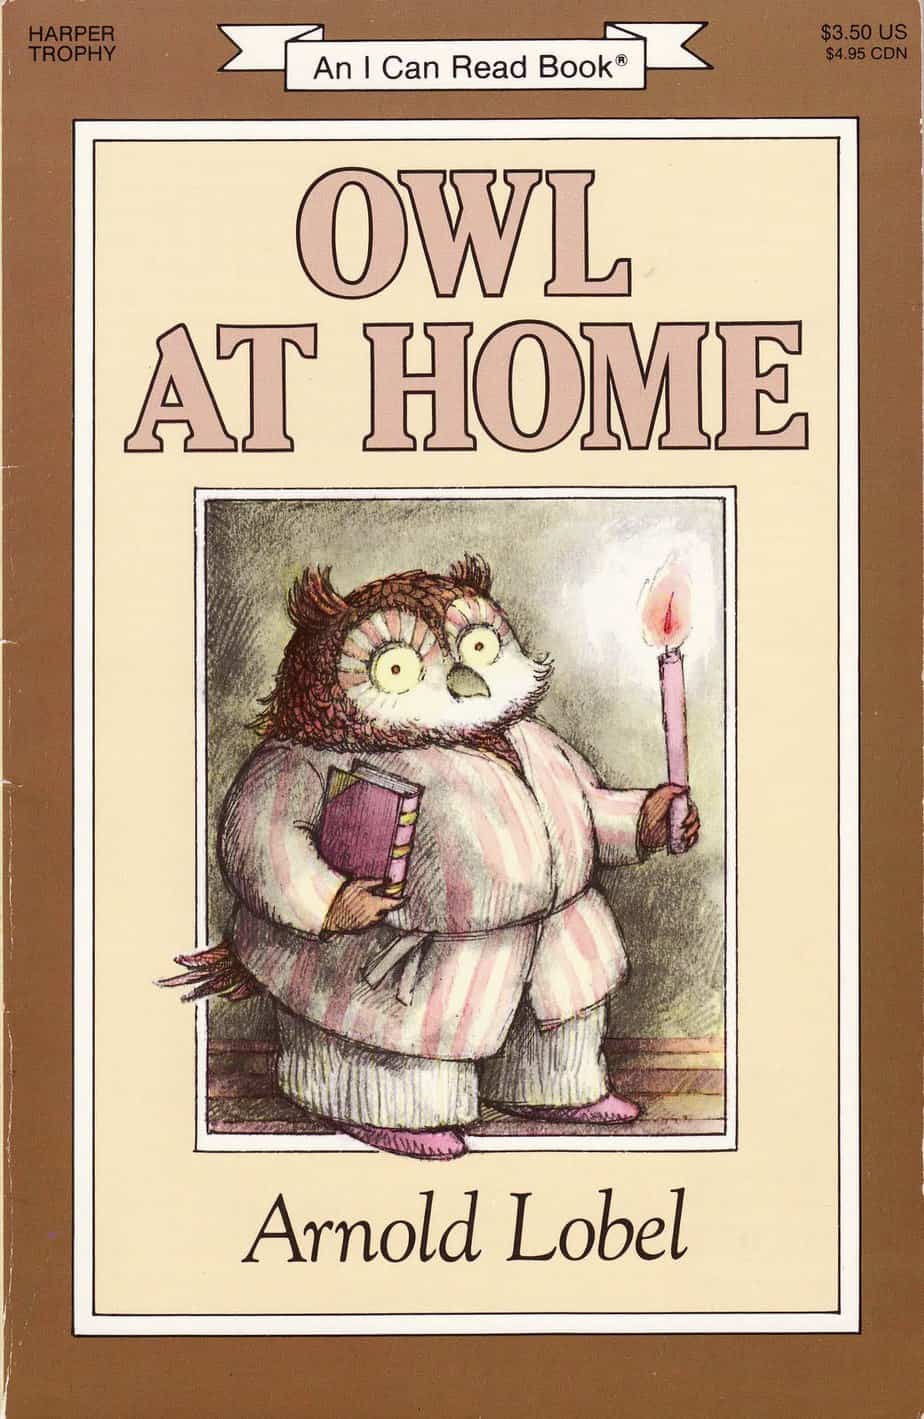 Owl At Home by Arnold Lobel Analysis